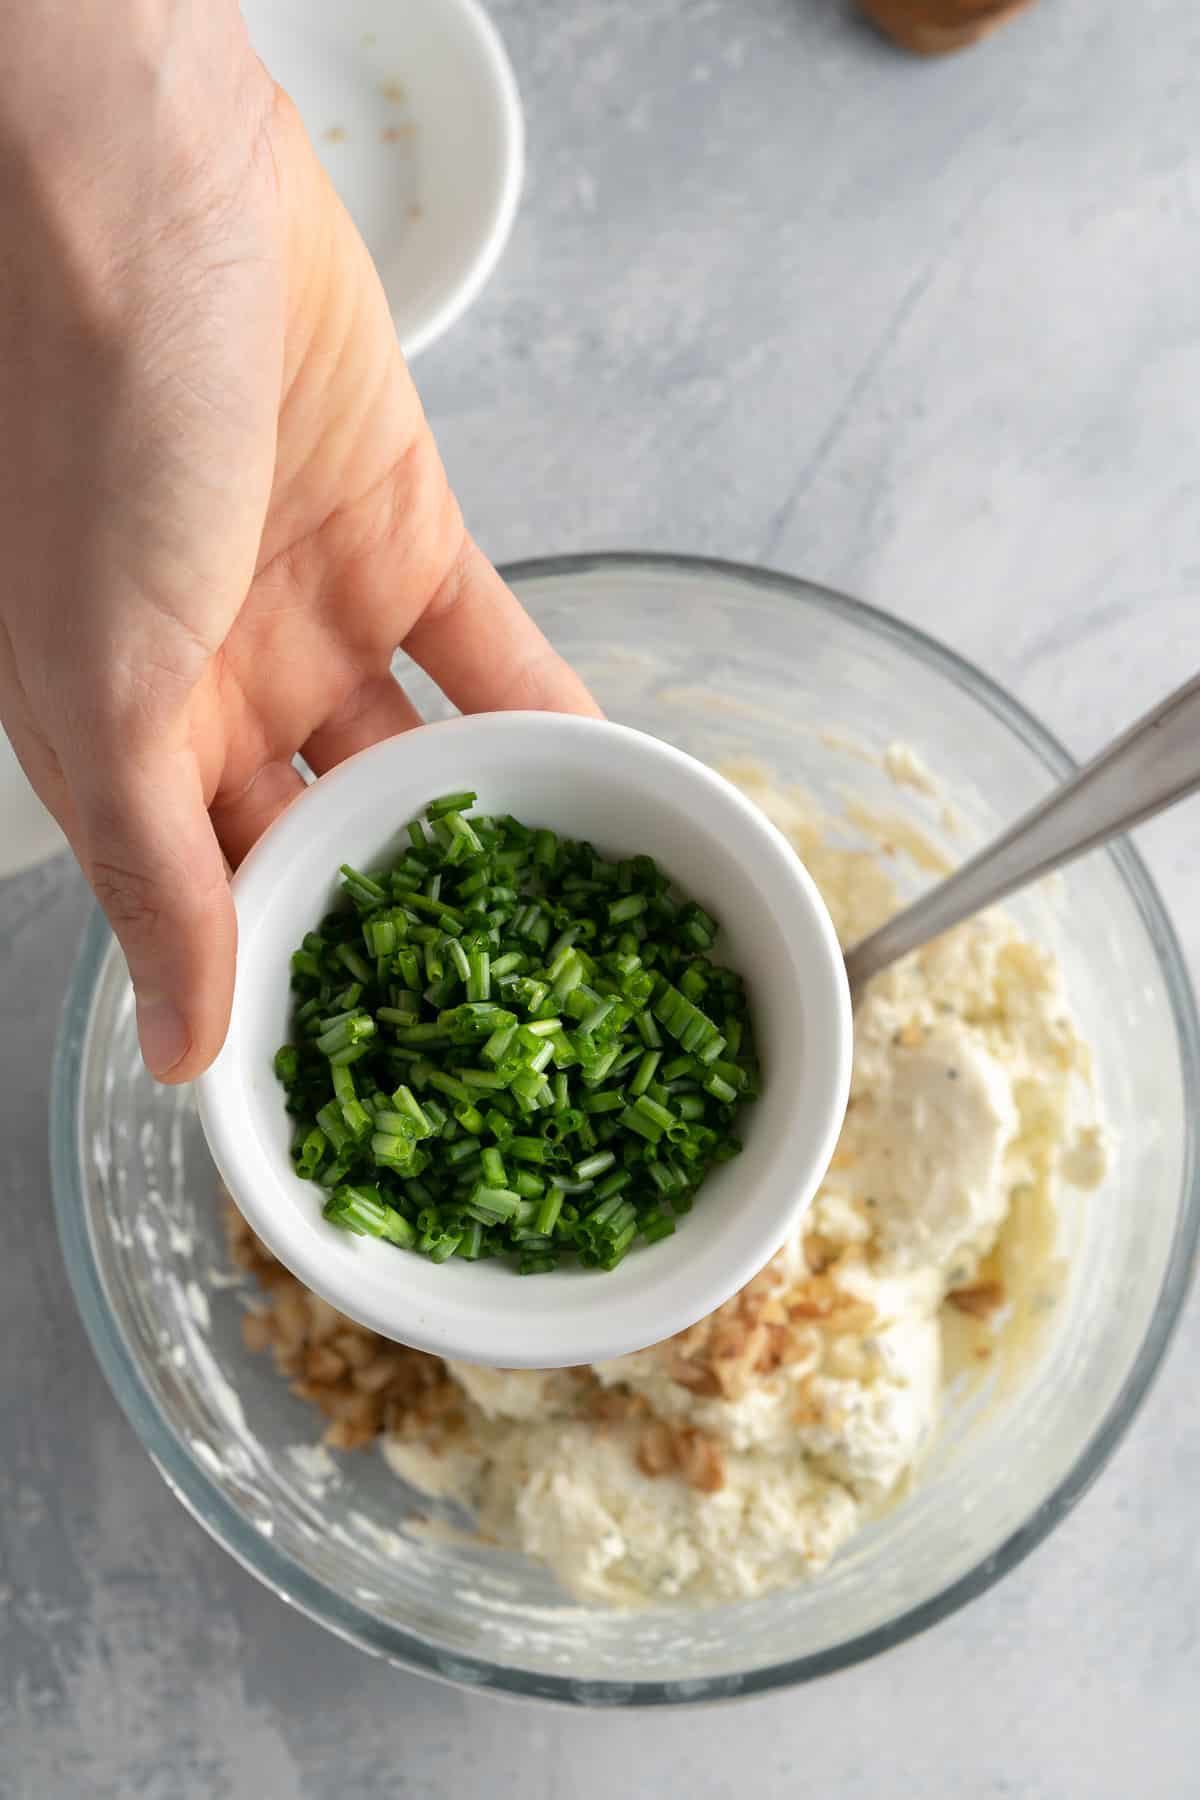 Cream cheese mixture in a bowl with a hand holding up a small bowl of chives to be mixed into it.